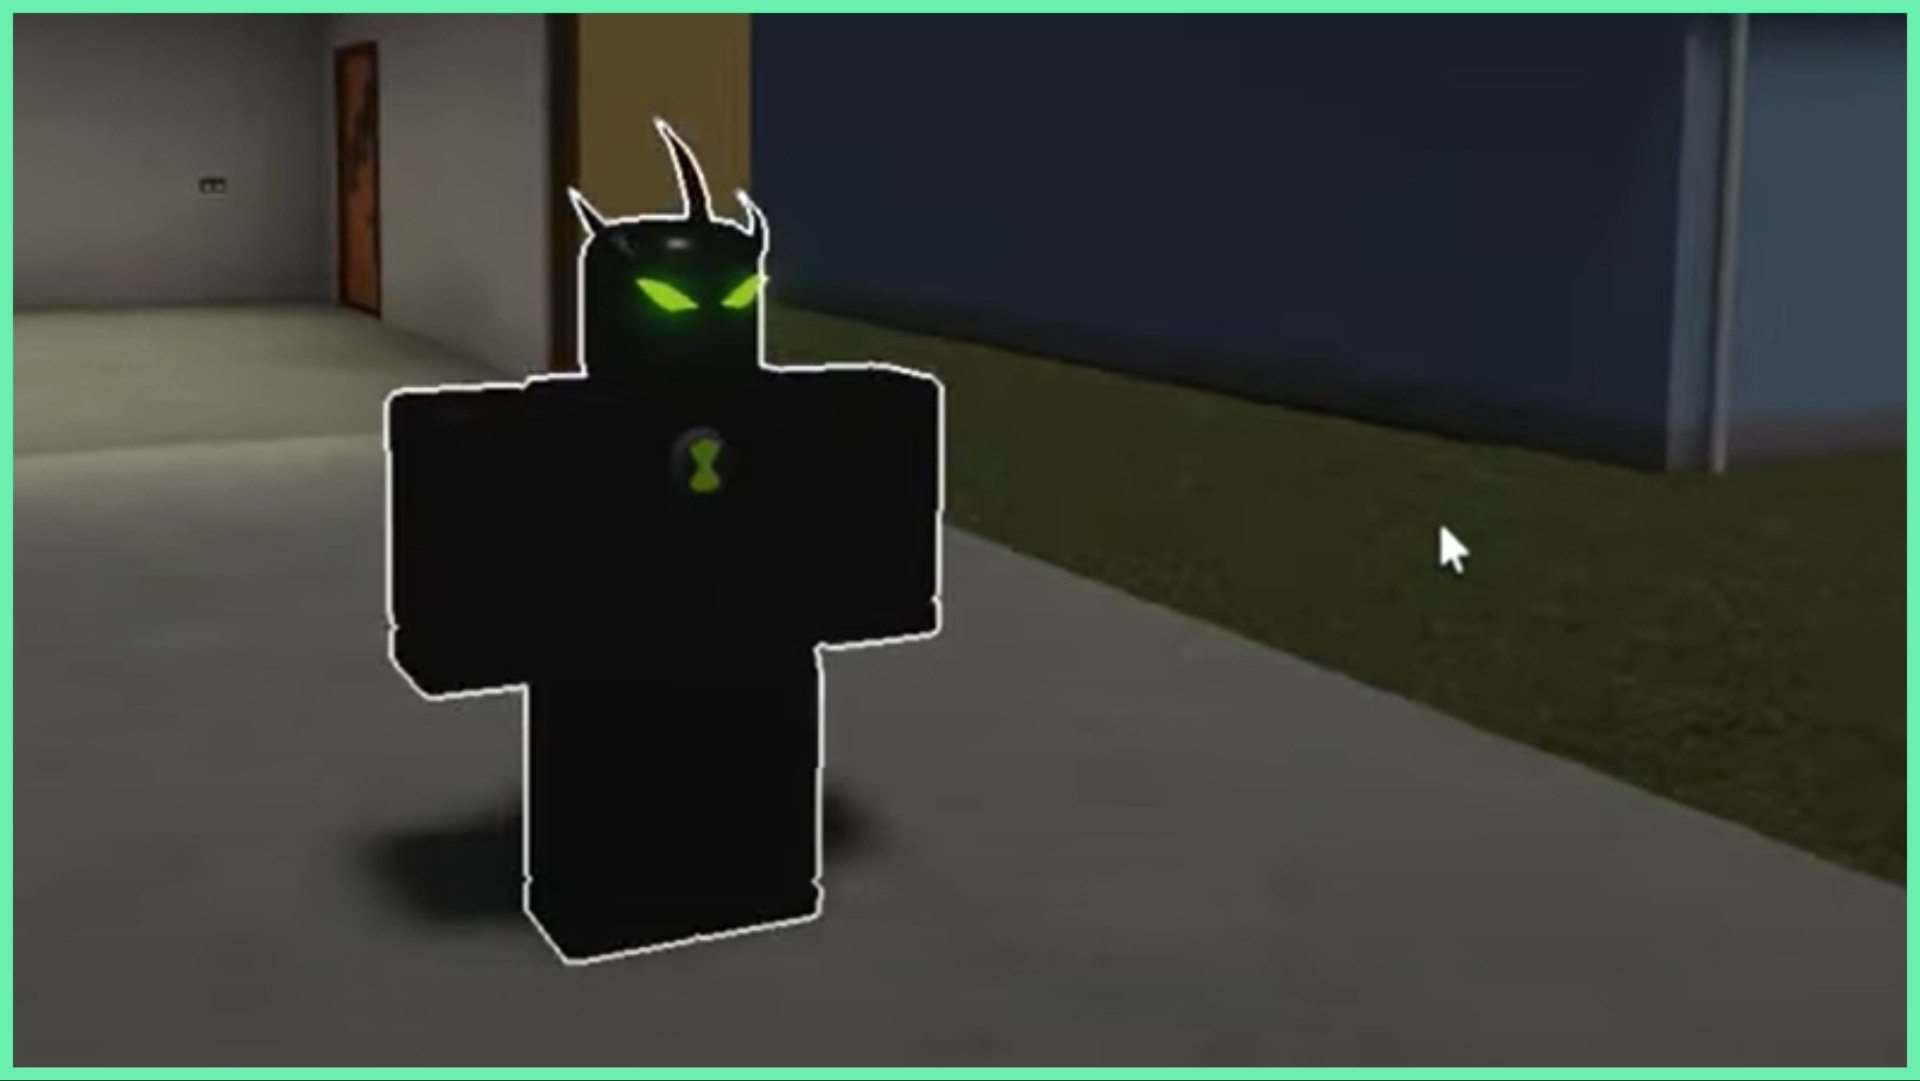 the image shows the player as alien x stood idly in a driveway in the spawn neighbourhood. He is a fully black figure with glowing white eyes and three points from his head like horns that travel backwards